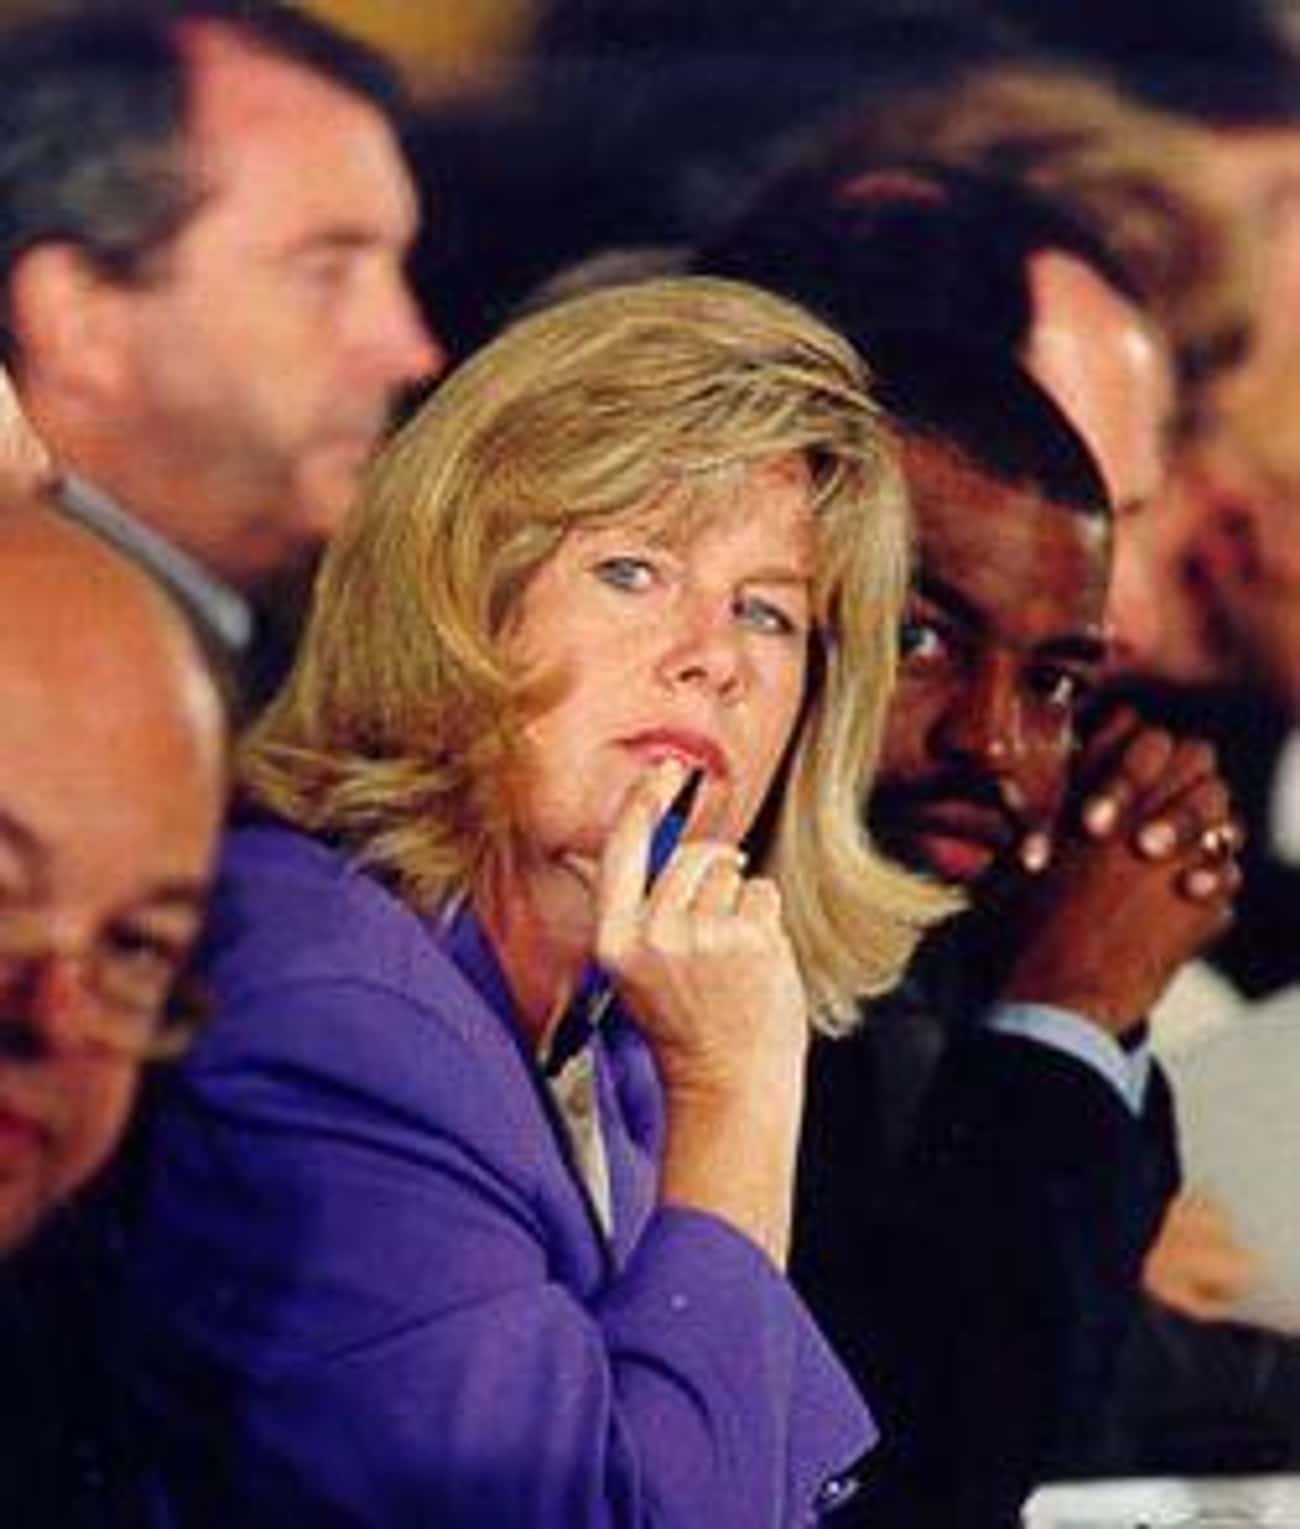 Snider Implied Tipper Gore Had A Dirty Mind